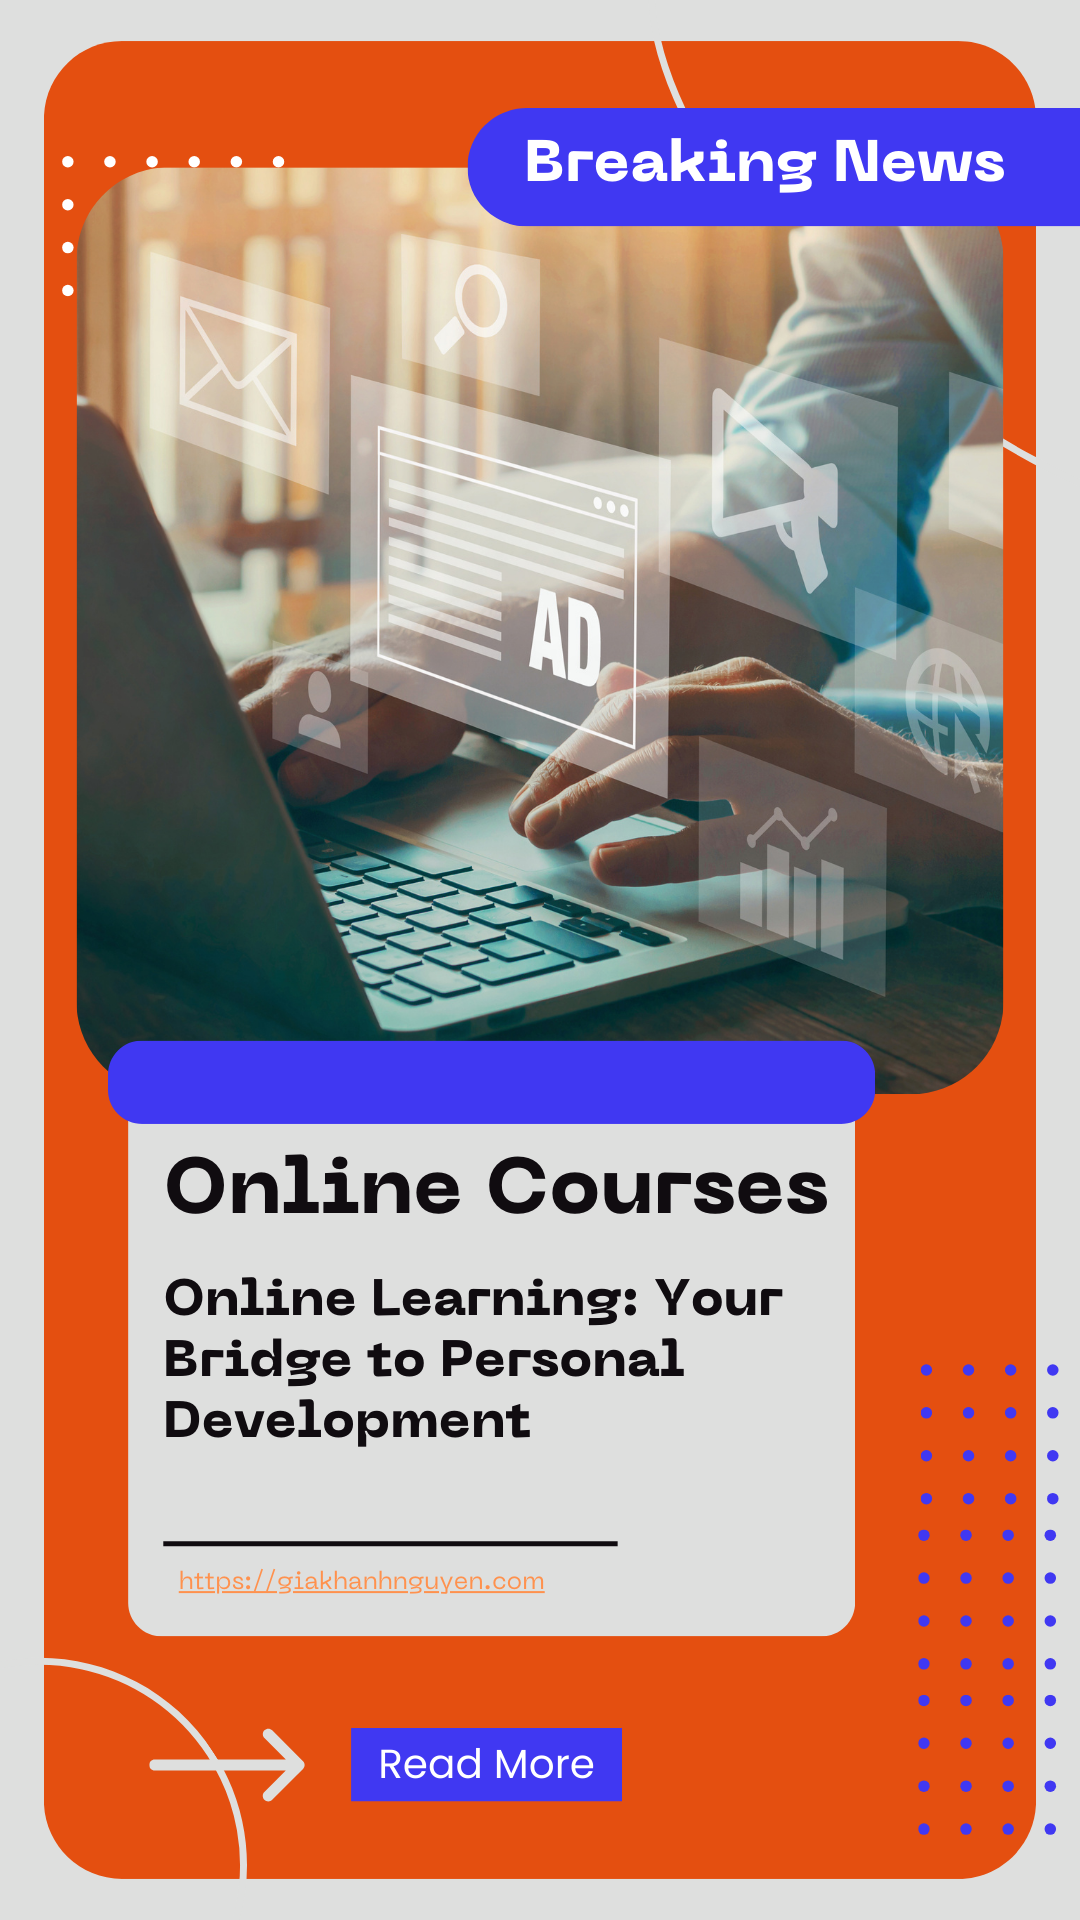 Online learning provides unparalleled accessibility and flexibility. Regardless of your location or daily schedule, online courses are available at your fingertips. This flexibility allows individuals to pursue personal development without disrupting their work, family, or personal commitments. Whether you're an early bird or a night owl, online courses adapt to your schedule, making it easier than ever to invest in your personal growth.